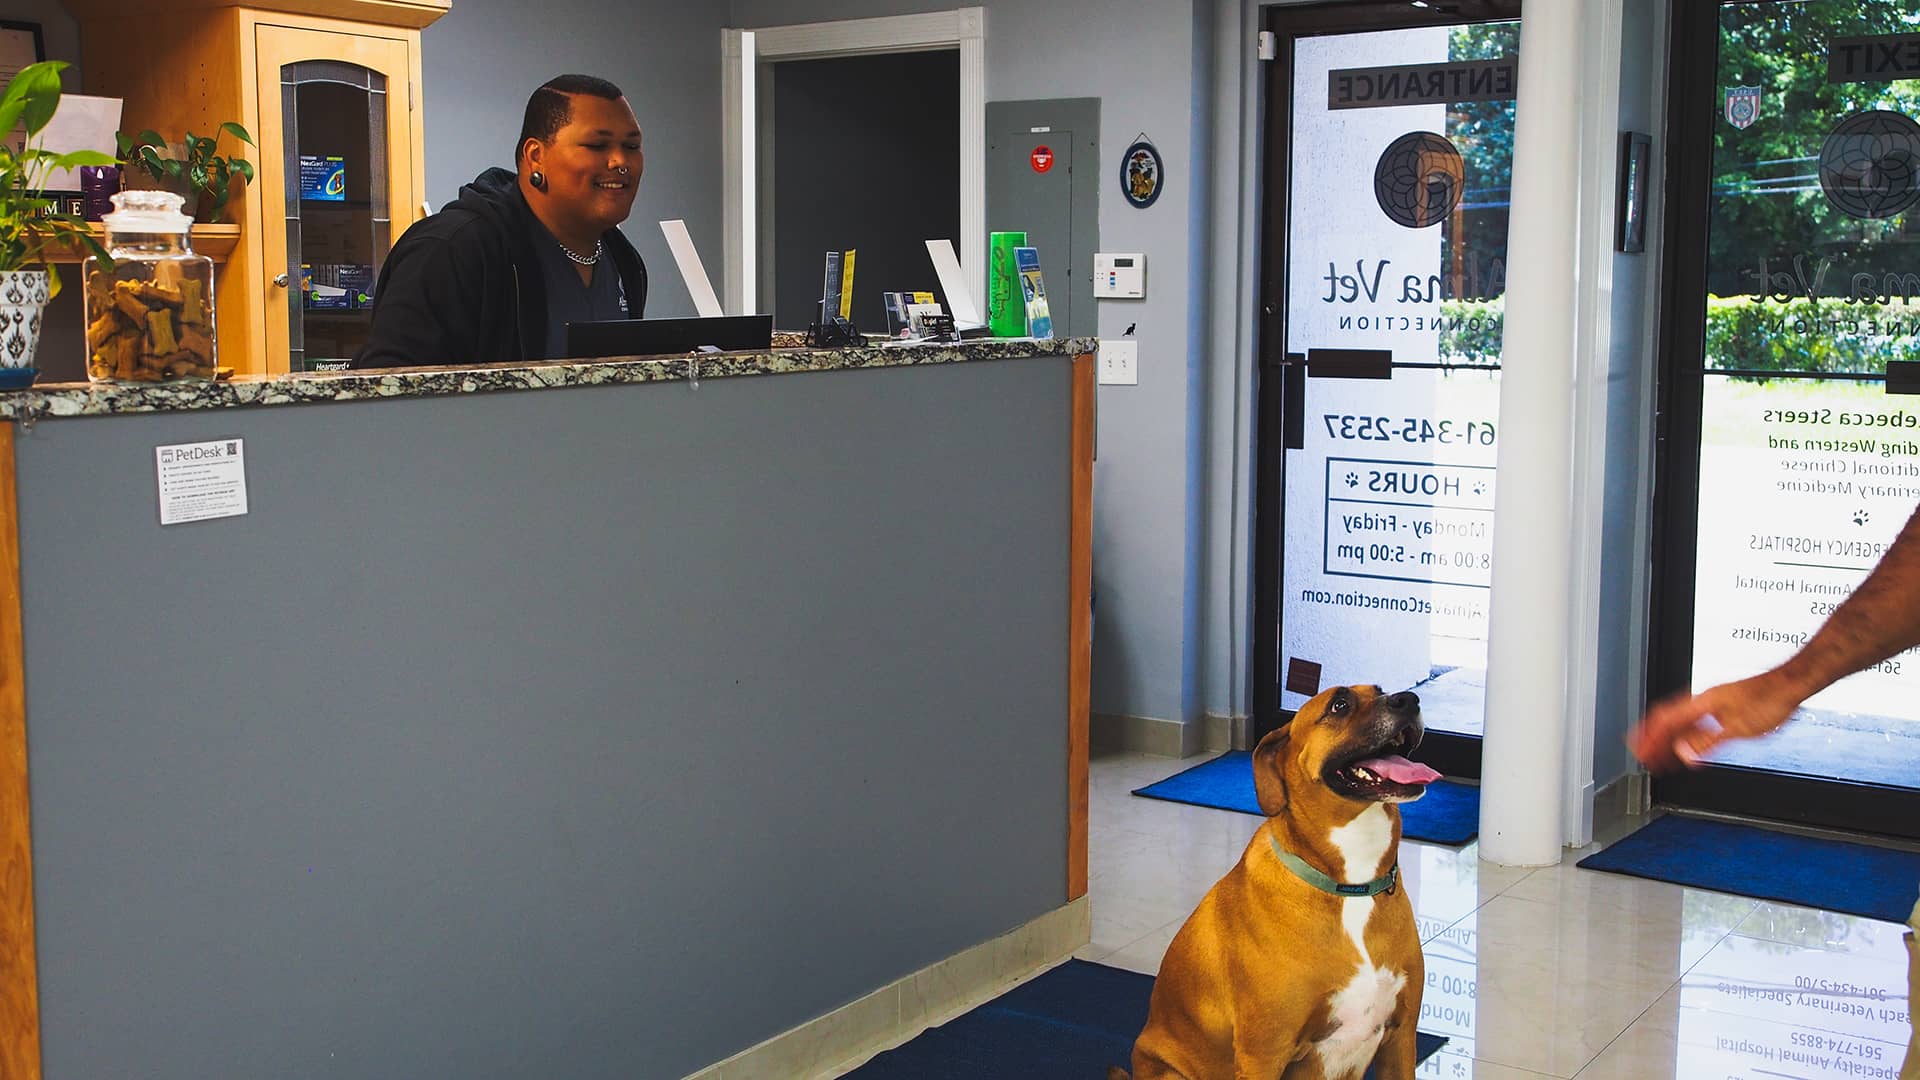 A friendly receptionist is smiling behind the front desk at a veterinary clinic, engaging with a visitor. The desk has a jar of dog treats and some plants, creating a welcoming atmosphere. In front of the desk, a happy brown dog with a green collar is sitting and panting, looking towards the entrance. The entrance door has the clinic's name and hours of operation visible. The overall scene conveys a warm and inviting environment for pets and their owners.